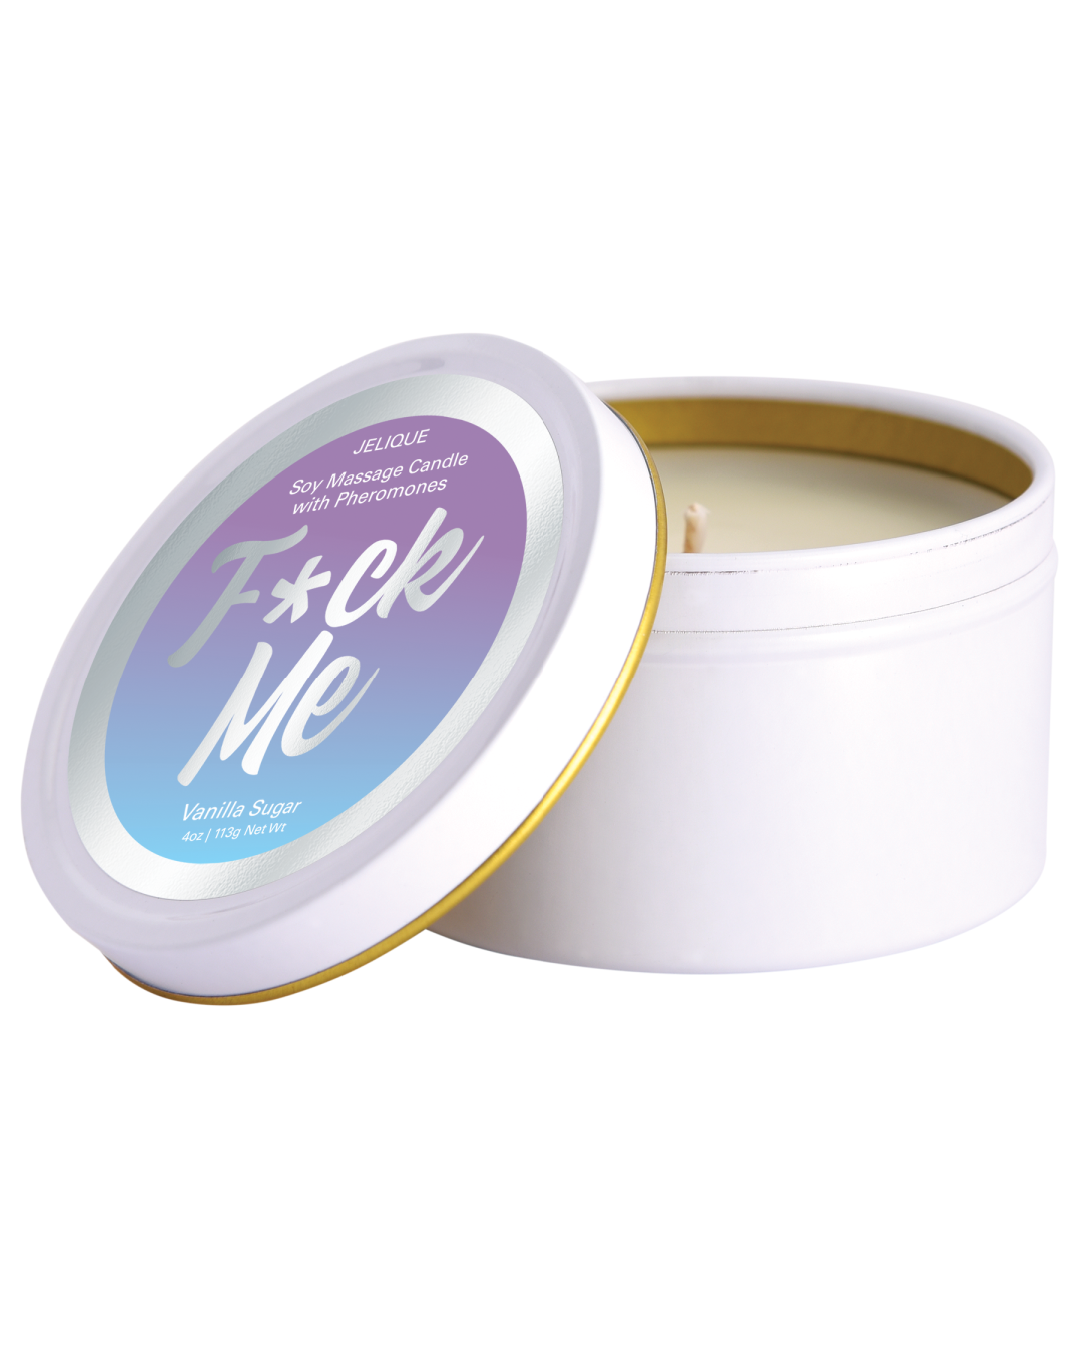 F*ck Me Pheromone Massage Candle - Vanilla Sugar Scent with lid off